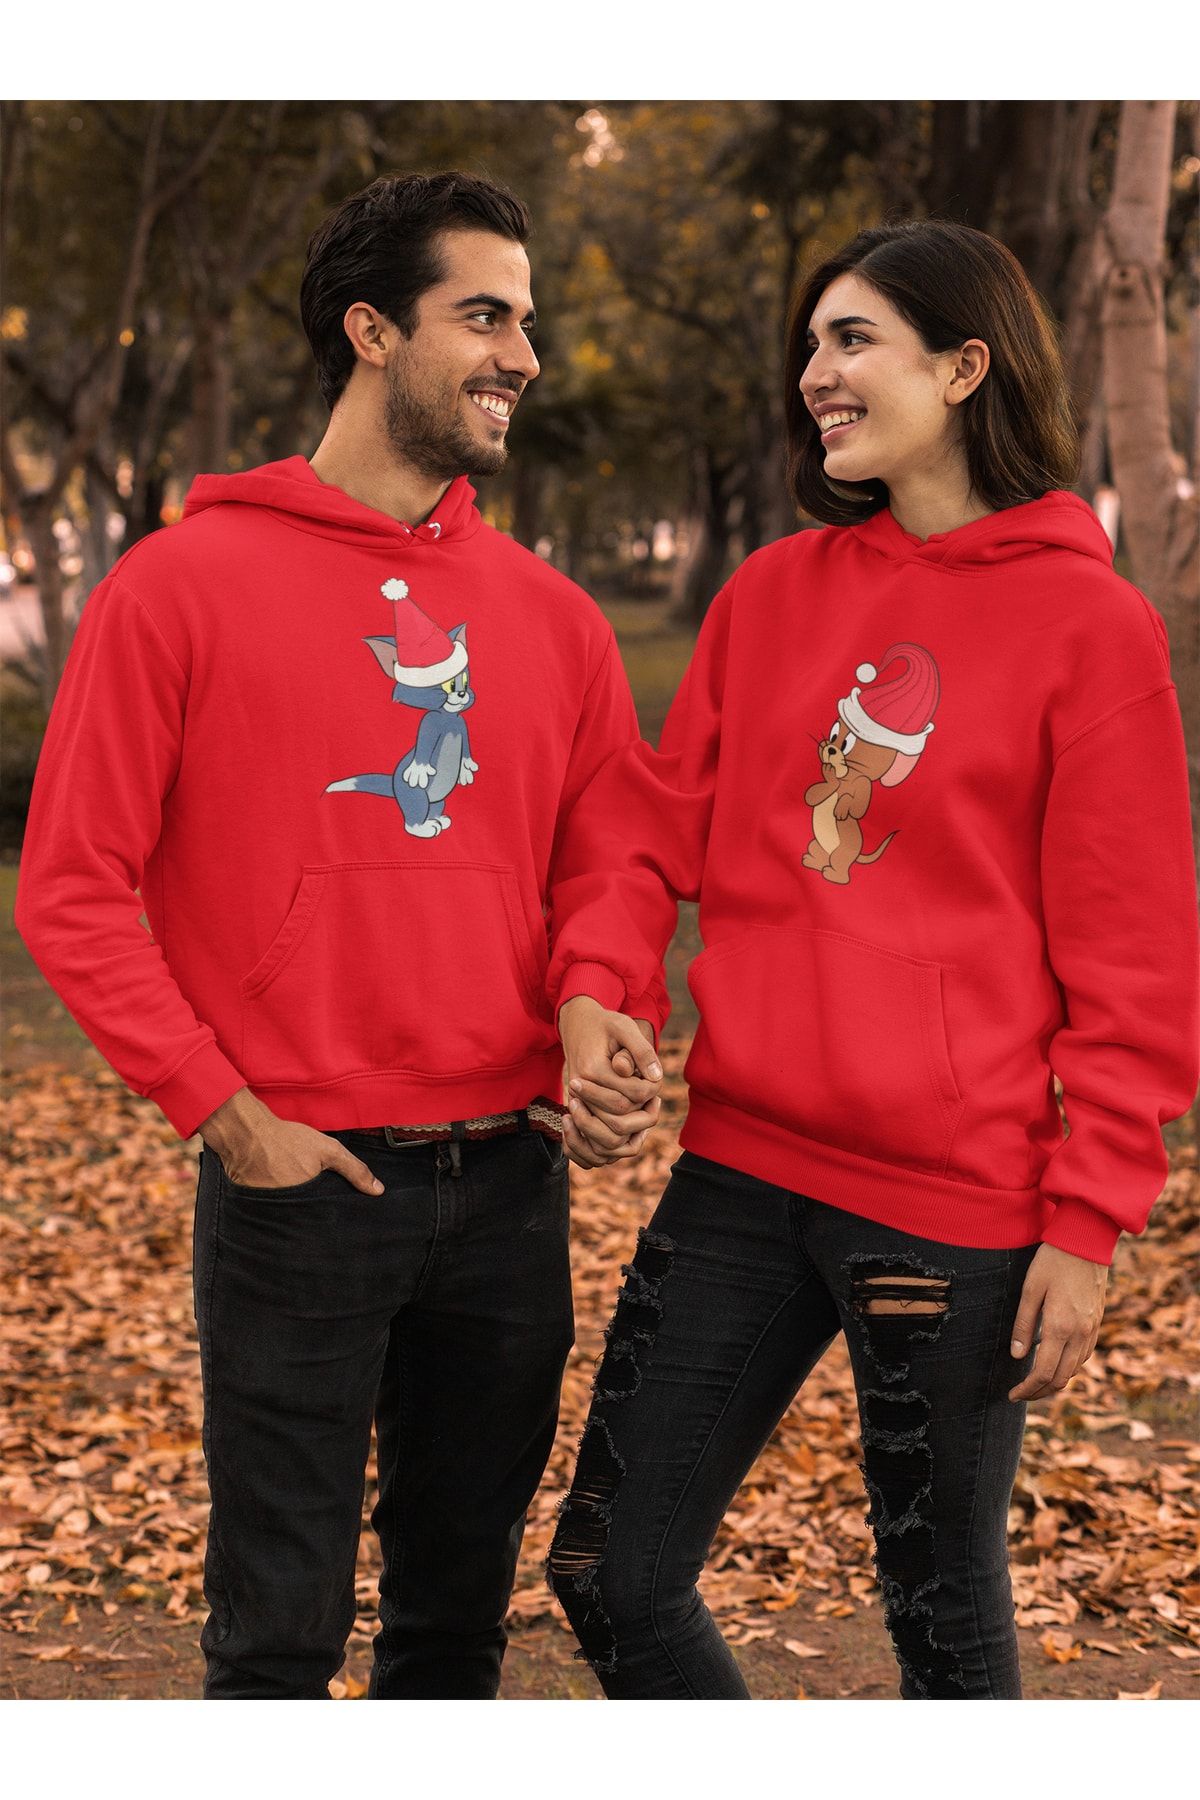 TEENS New Year's Tom and Jerry Printed Lover Couple Combination